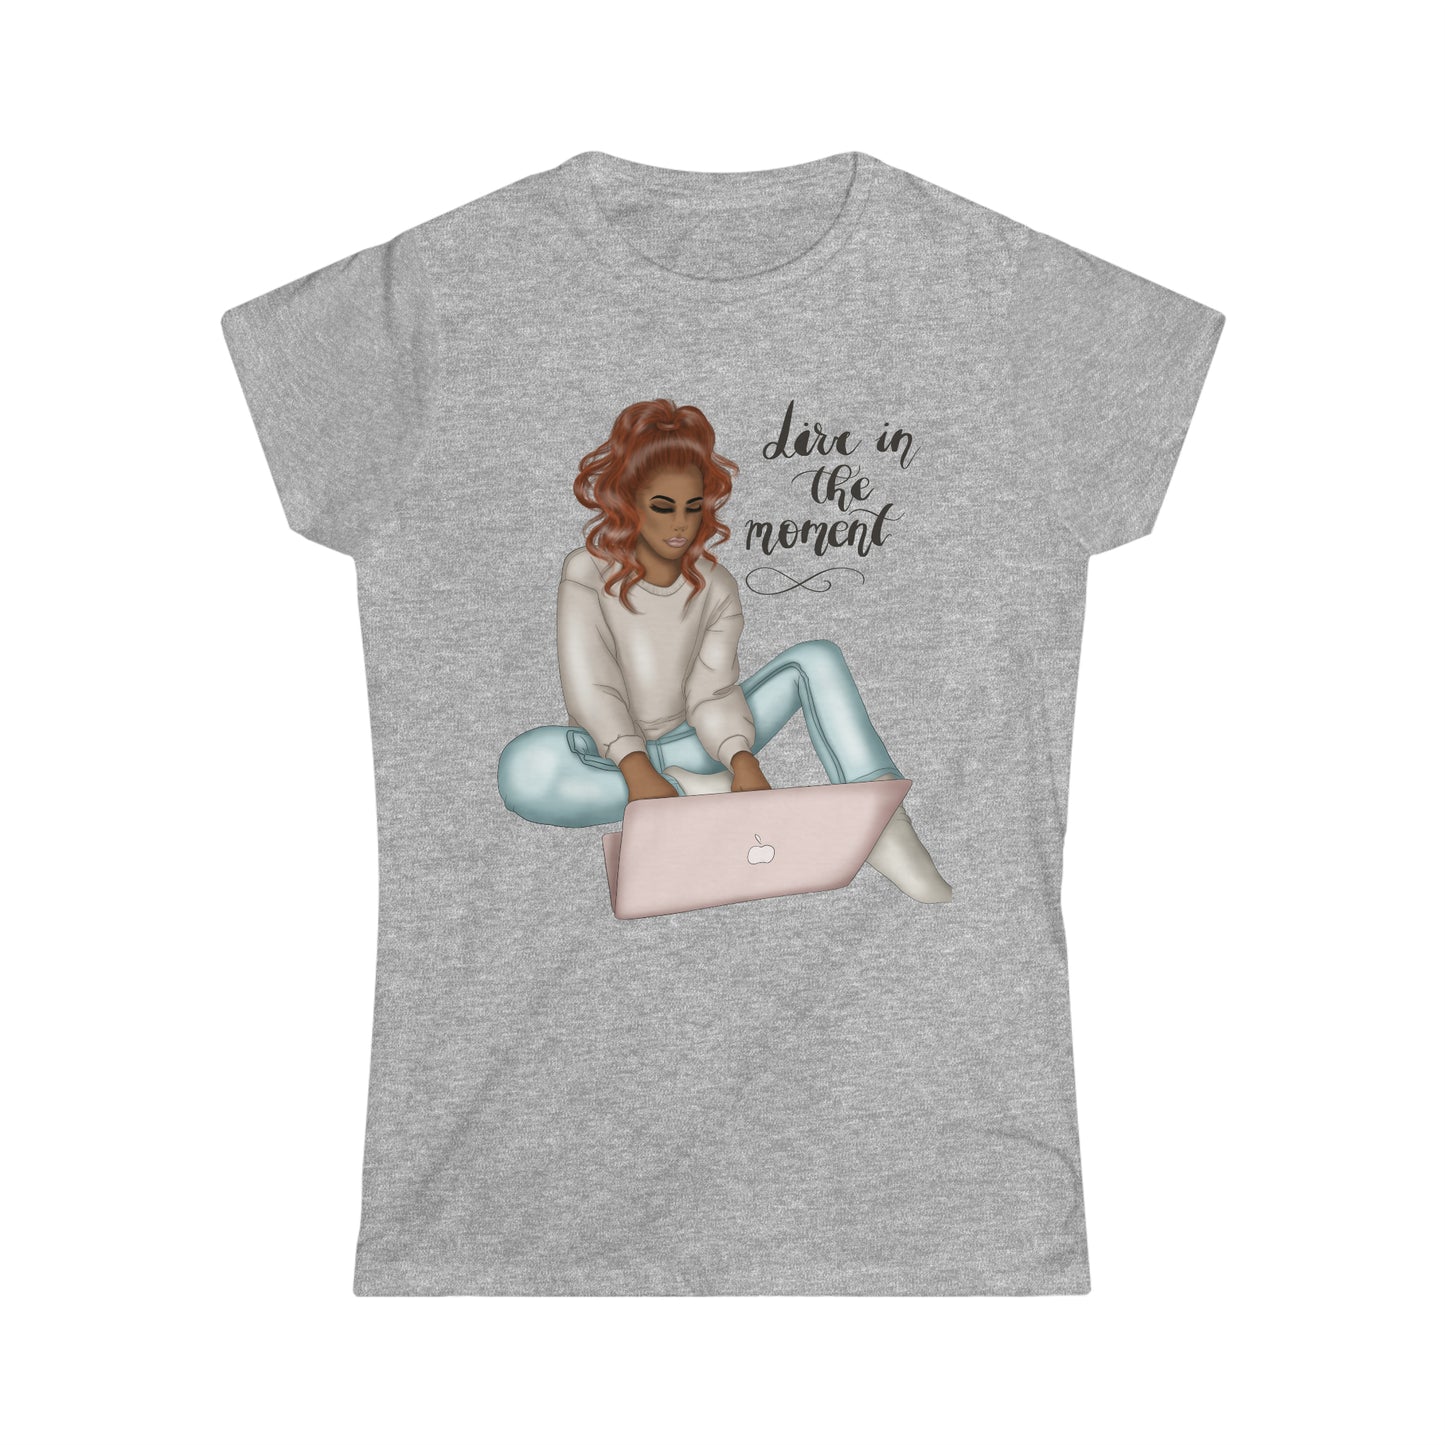 Dive In The Moment Tee - Brown Hair